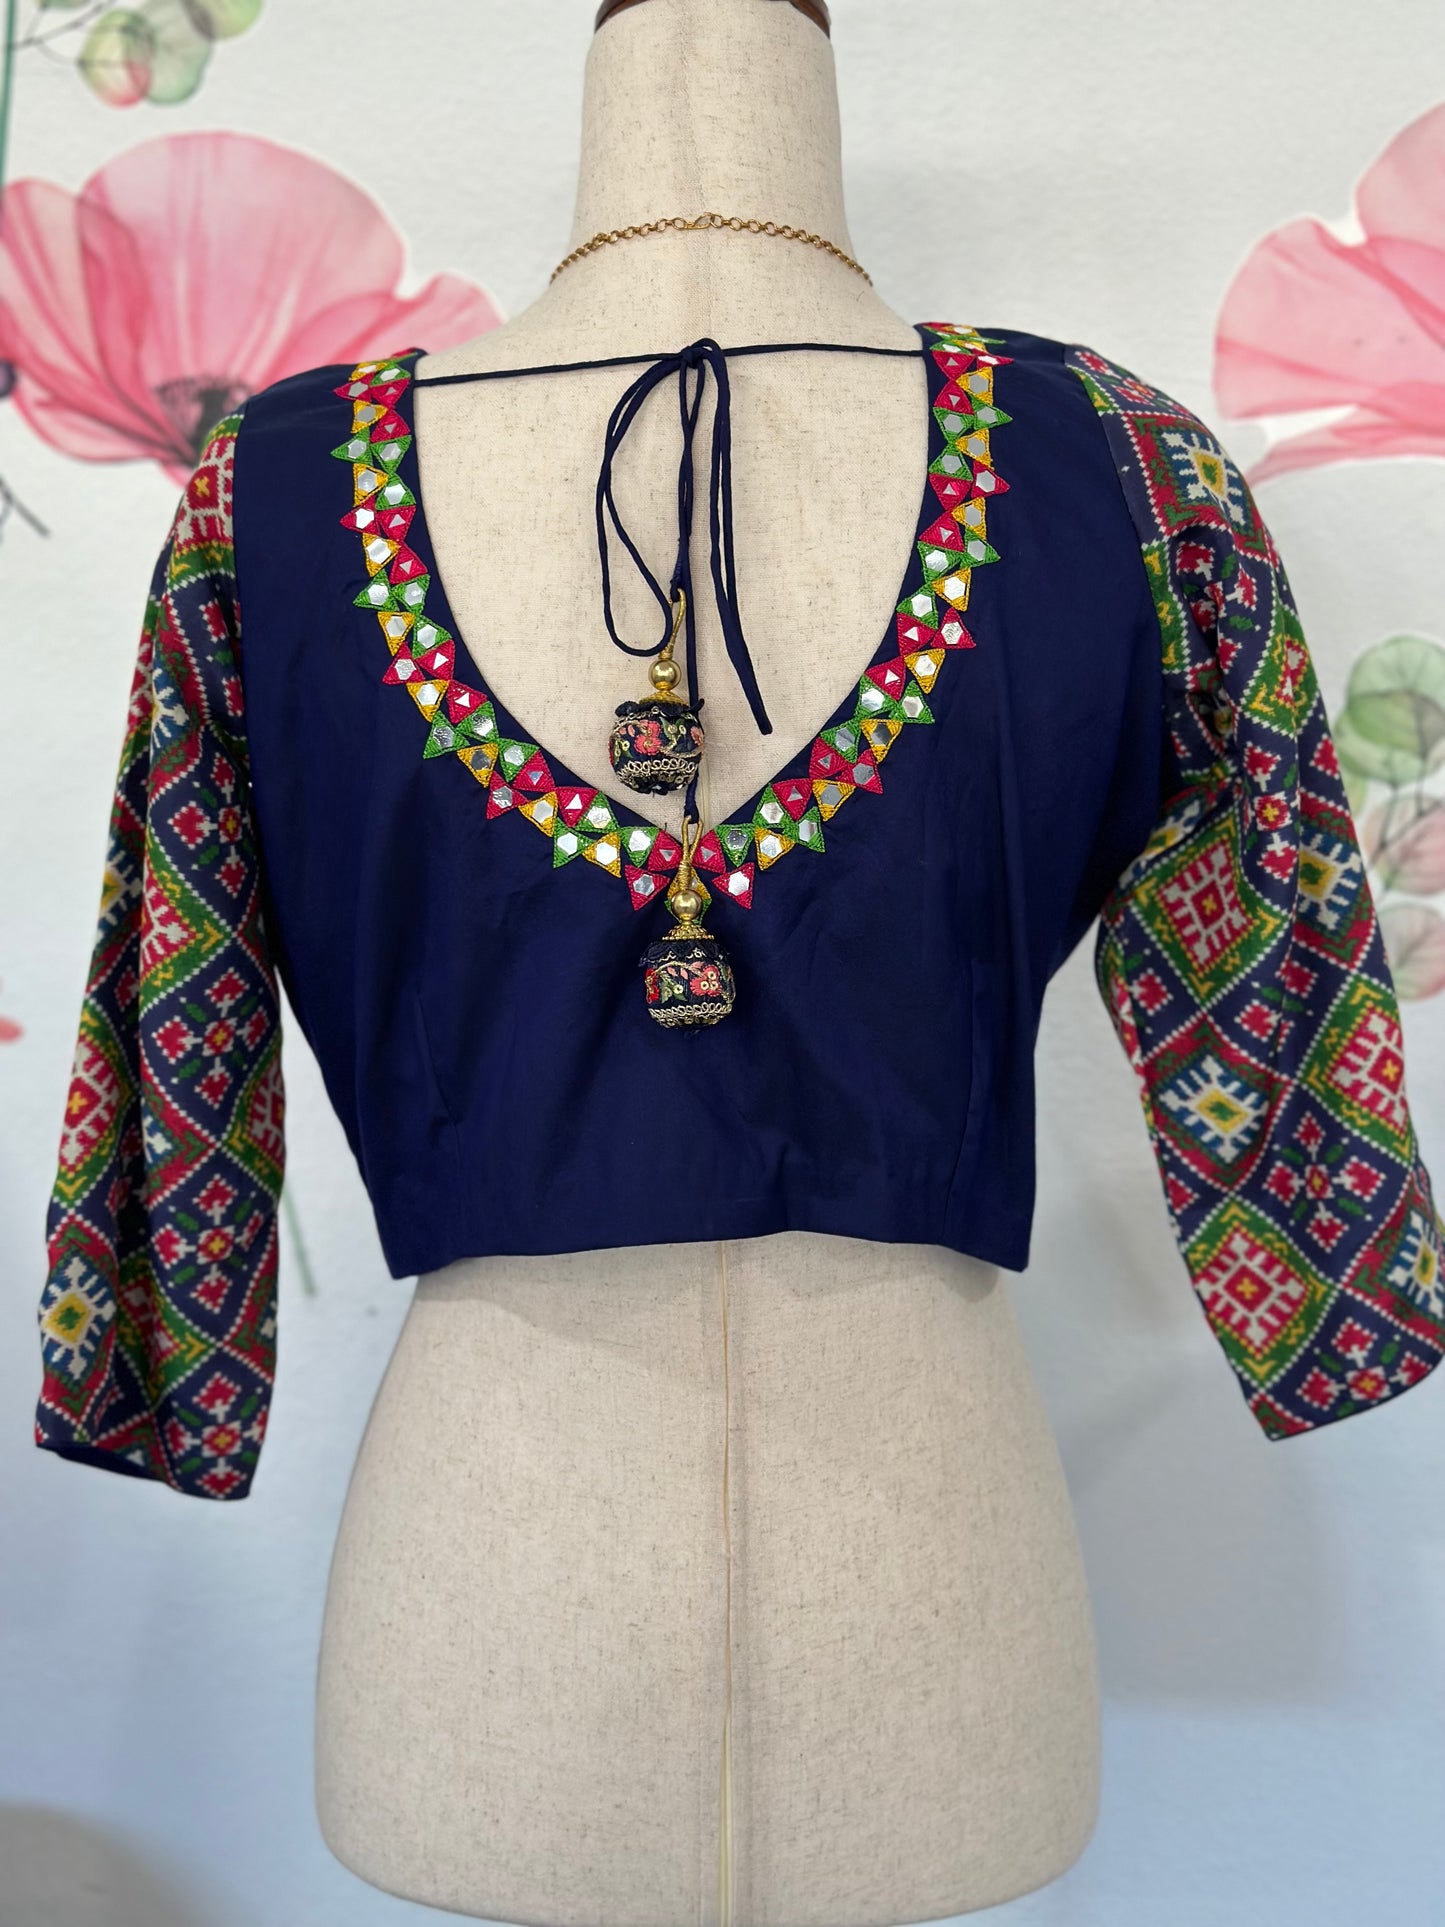 Patola blouse | Hand embroidery blouse | saree blouses in USA